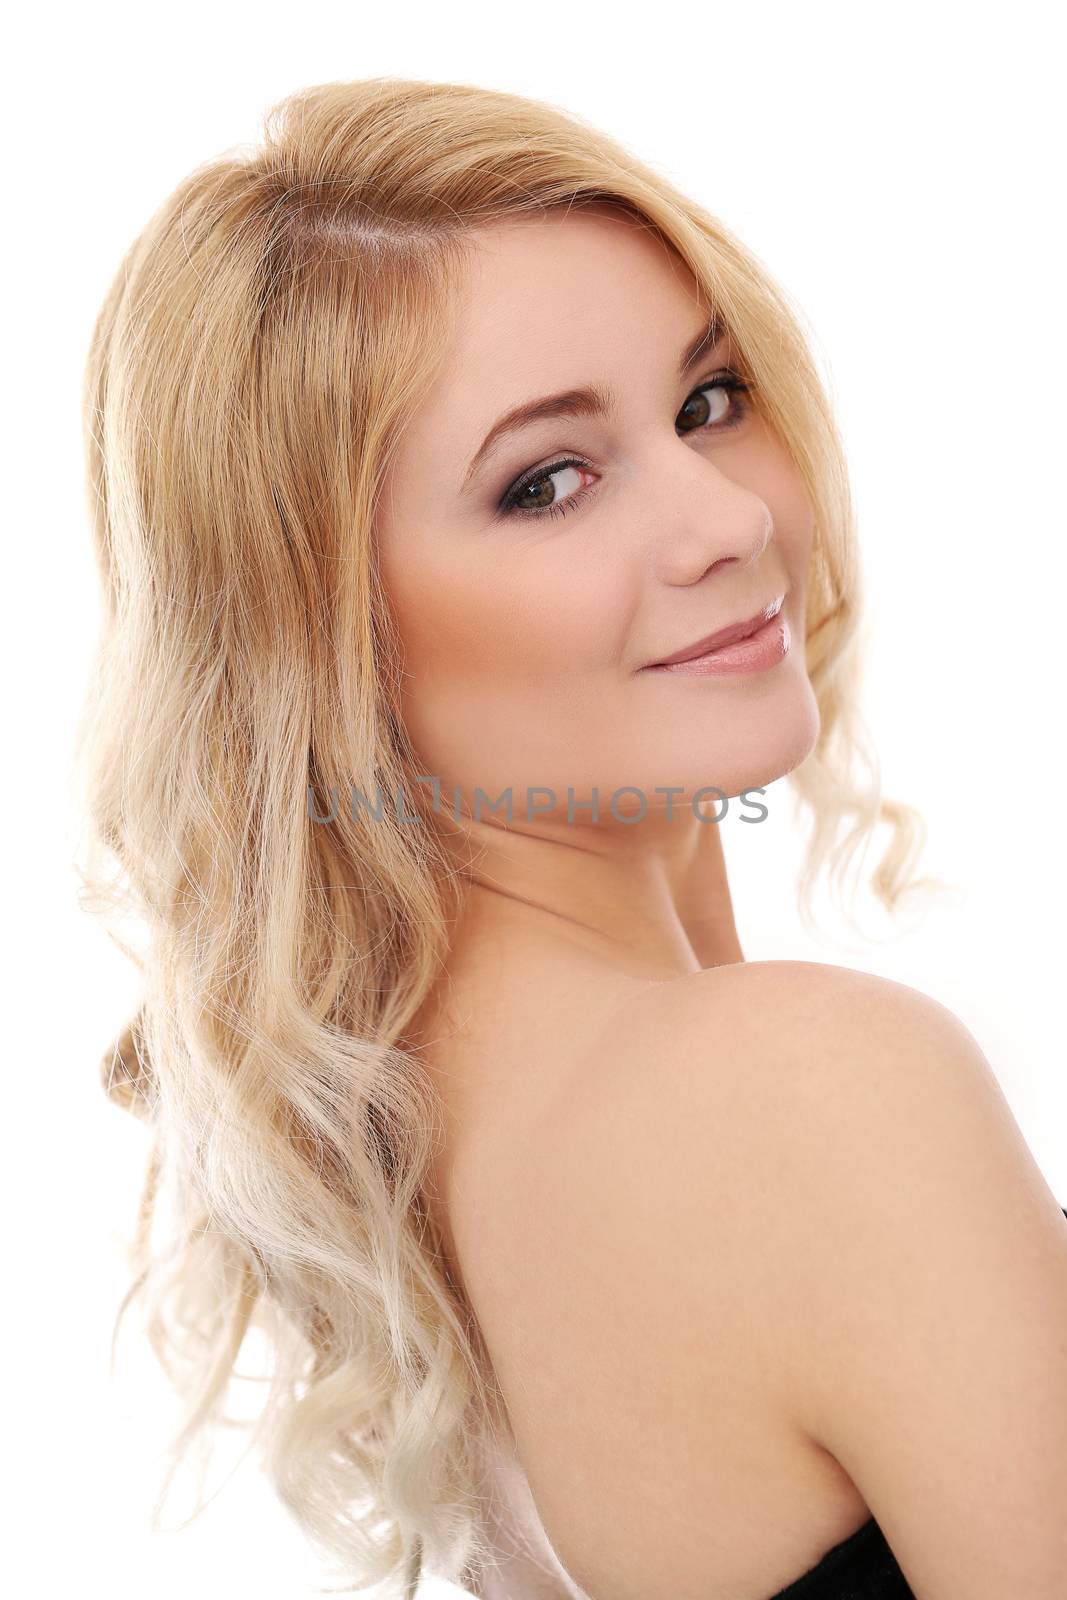 Portrait of a beautiful blonde girl with curly hair who is posing over a white background